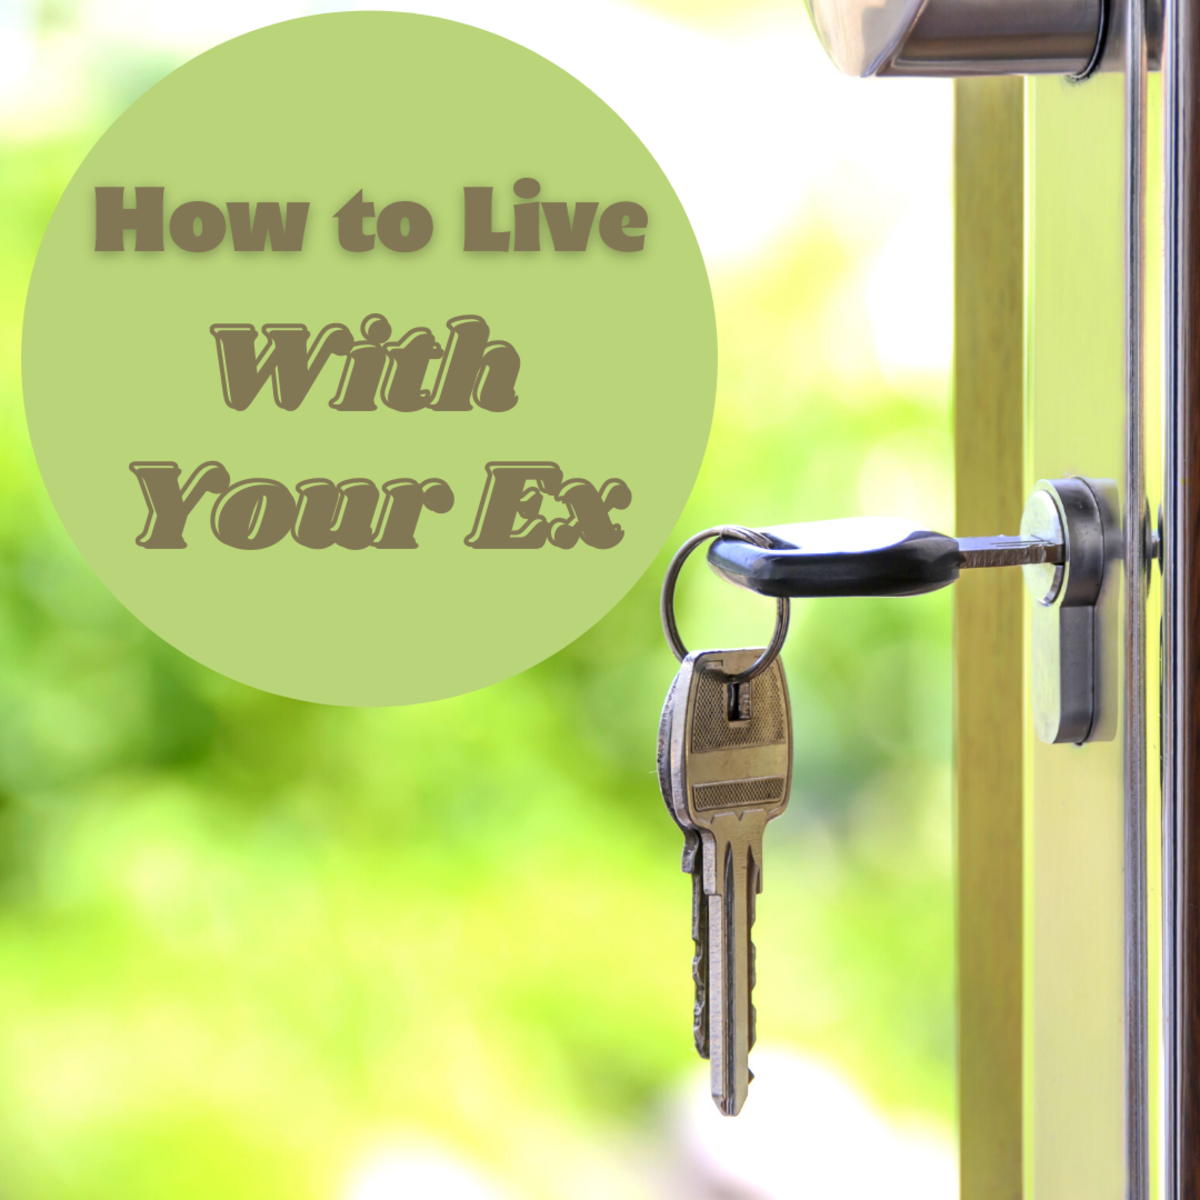 Are you and your ex broken up but still living together? Learn how to navigate this tricky situation with these tips!